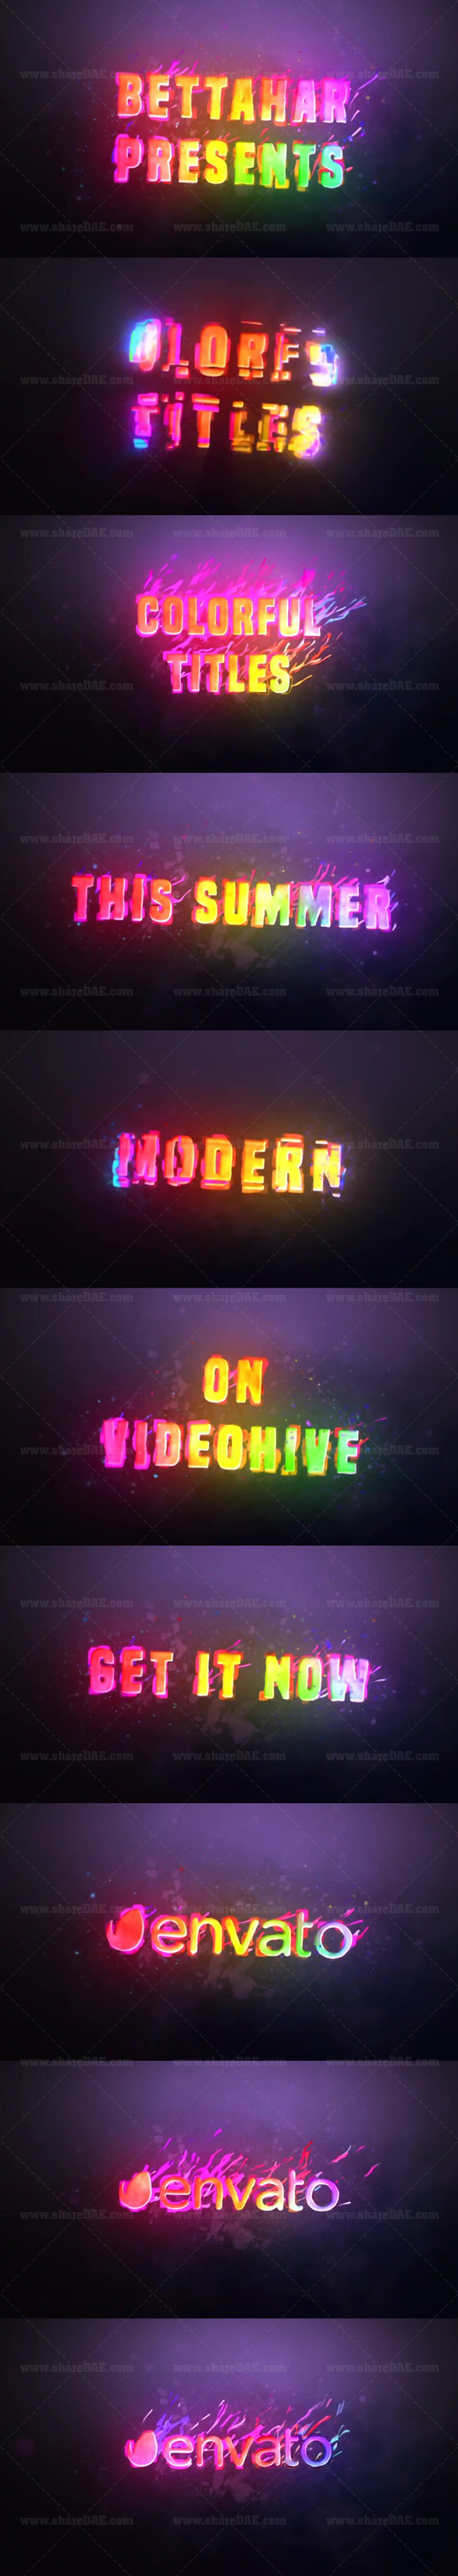 Videohive - Colorful Titles 20198053 - Free Download 